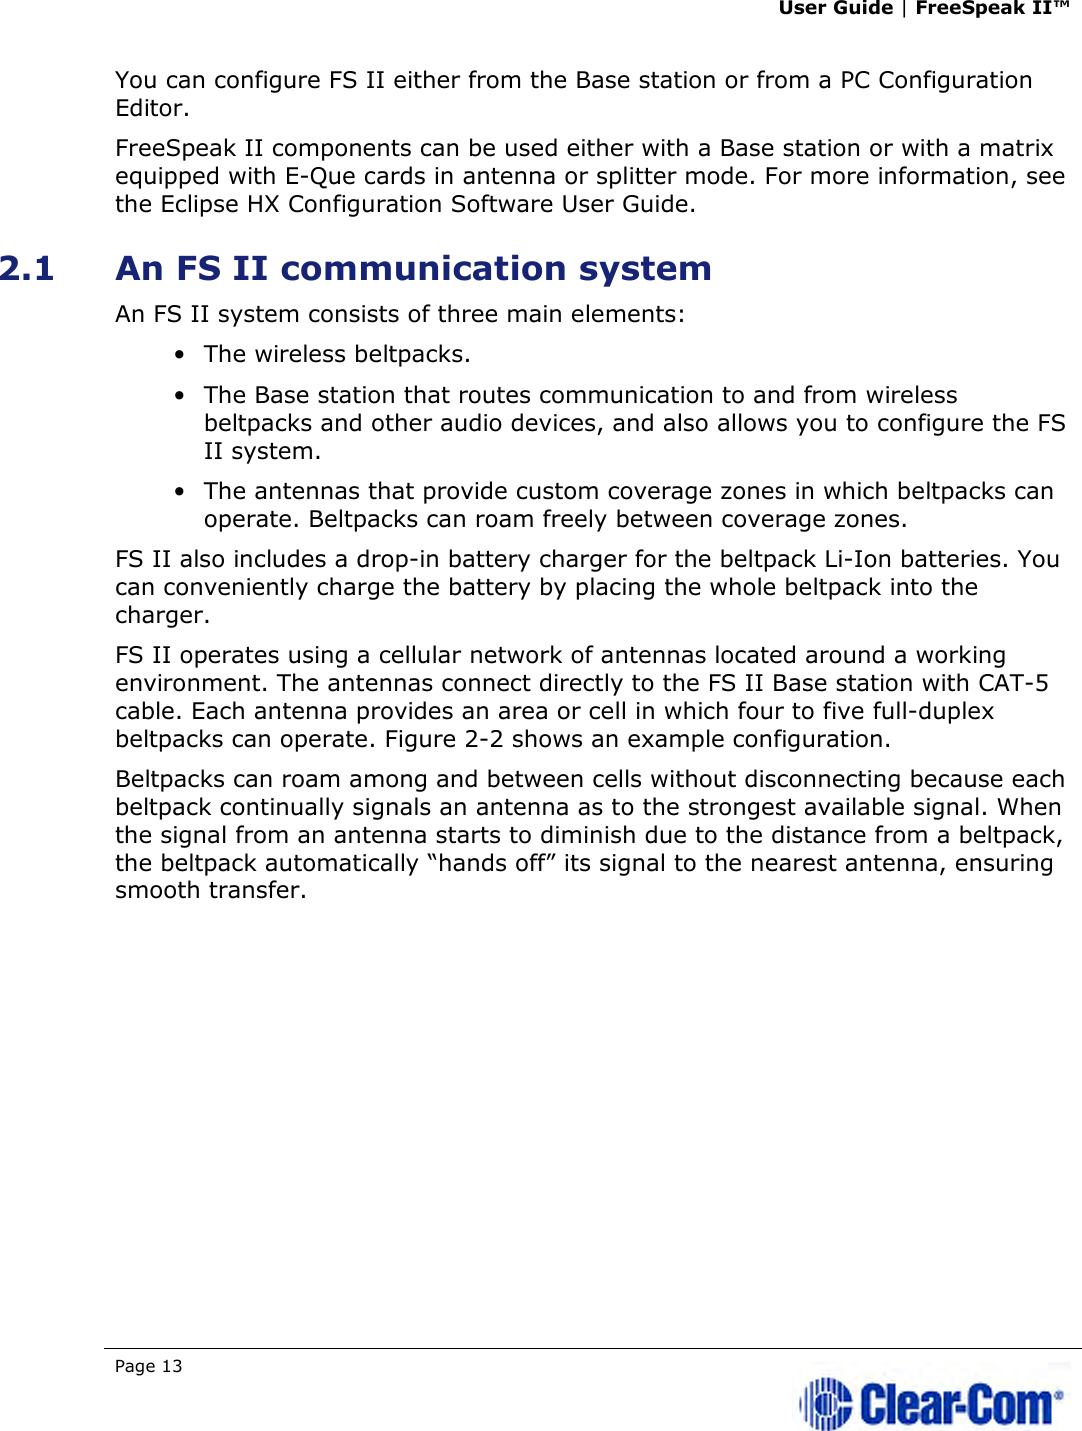 User Guide | FreeSpeak II™  Page 13   You can configure FS II either from the Base station or from a PC Configuration Editor. FreeSpeak II components can be used either with a Base station or with a matrix equipped with E-Que cards in antenna or splitter mode. For more information, see the Eclipse HX Configuration Software User Guide. 2.1 An FS II communication system  An FS II system consists of three main elements:  • The wireless beltpacks. • The Base station that routes communication to and from wireless beltpacks and other audio devices, and also allows you to configure the FS II system. • The antennas that provide custom coverage zones in which beltpacks can operate. Beltpacks can roam freely between coverage zones. FS II also includes a drop-in battery charger for the beltpack Li-Ion batteries. You can conveniently charge the battery by placing the whole beltpack into the charger. FS II operates using a cellular network of antennas located around a working environment. The antennas connect directly to the FS II Base station with CAT-5 cable. Each antenna provides an area or cell in which four to five full-duplex beltpacks can operate. Figure 2-2 shows an example configuration.  Beltpacks can roam among and between cells without disconnecting because each beltpack continually signals an antenna as to the strongest available signal. When the signal from an antenna starts to diminish due to the distance from a beltpack, the beltpack automatically “hands off” its signal to the nearest antenna, ensuring smooth transfer. 